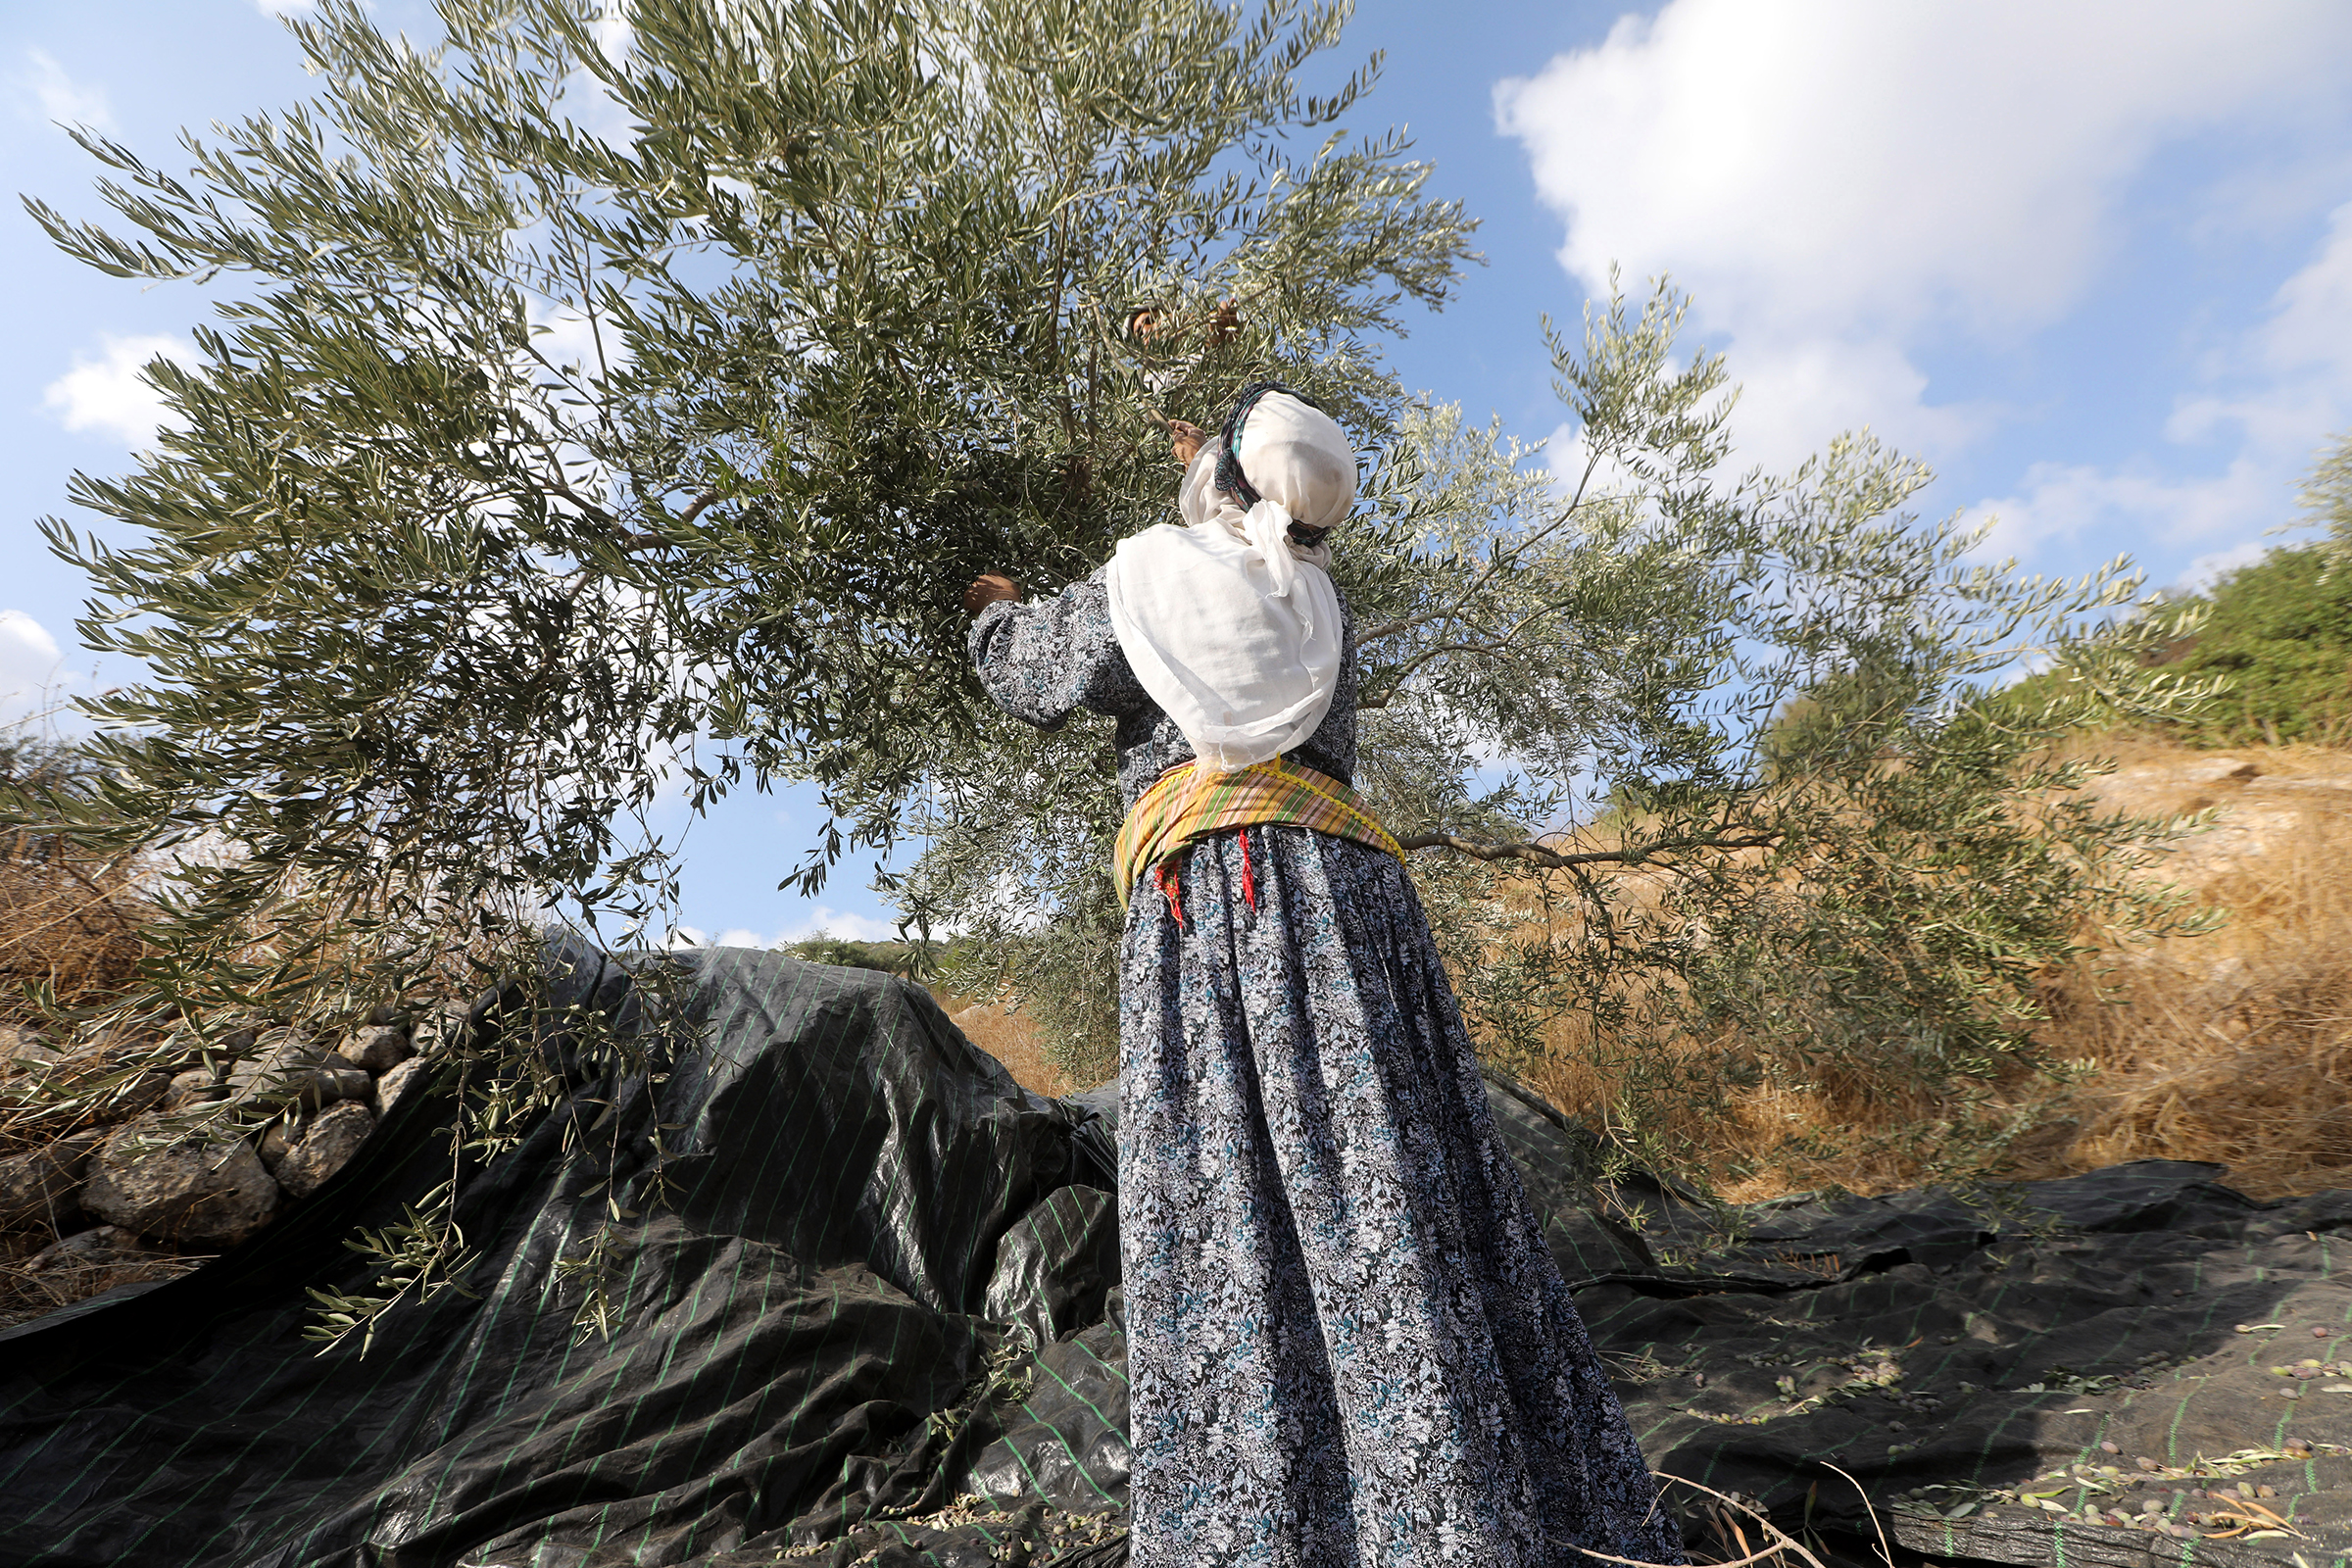 A Palestinian farmer collects olives in an olive grove on the outskirts of the West Bank village of Raba, near the city of Jenin, on Oct. 19, 2019. (Alaa Badarneh—EPA-EFE/Shutterstock)